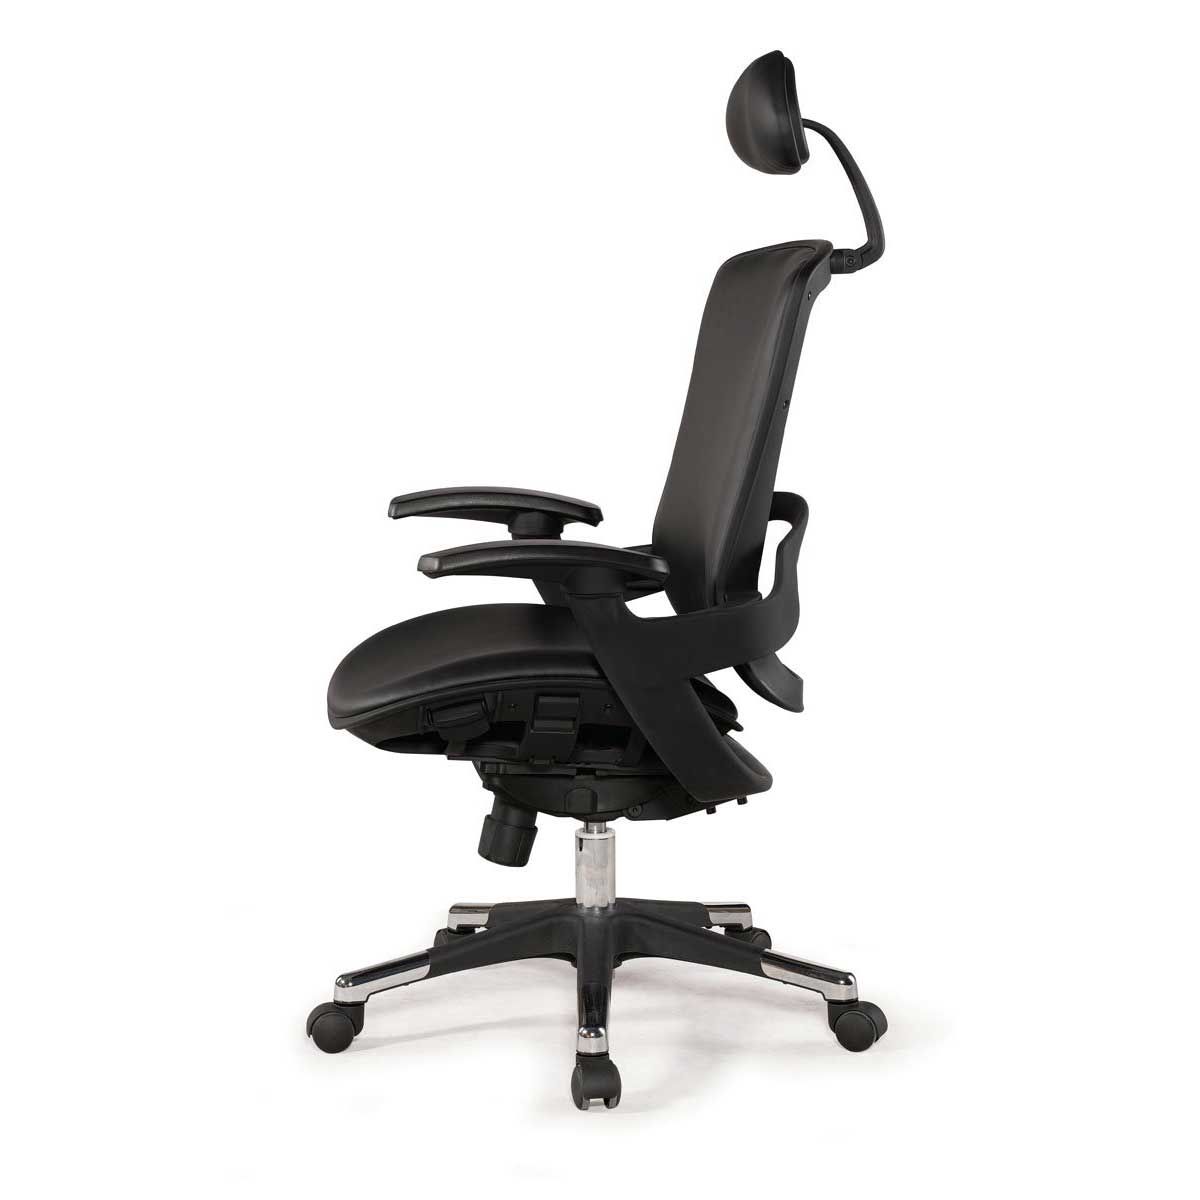 Ergonomic Executive Office Chairs With Preferred Furnitures (View 17 of 20)